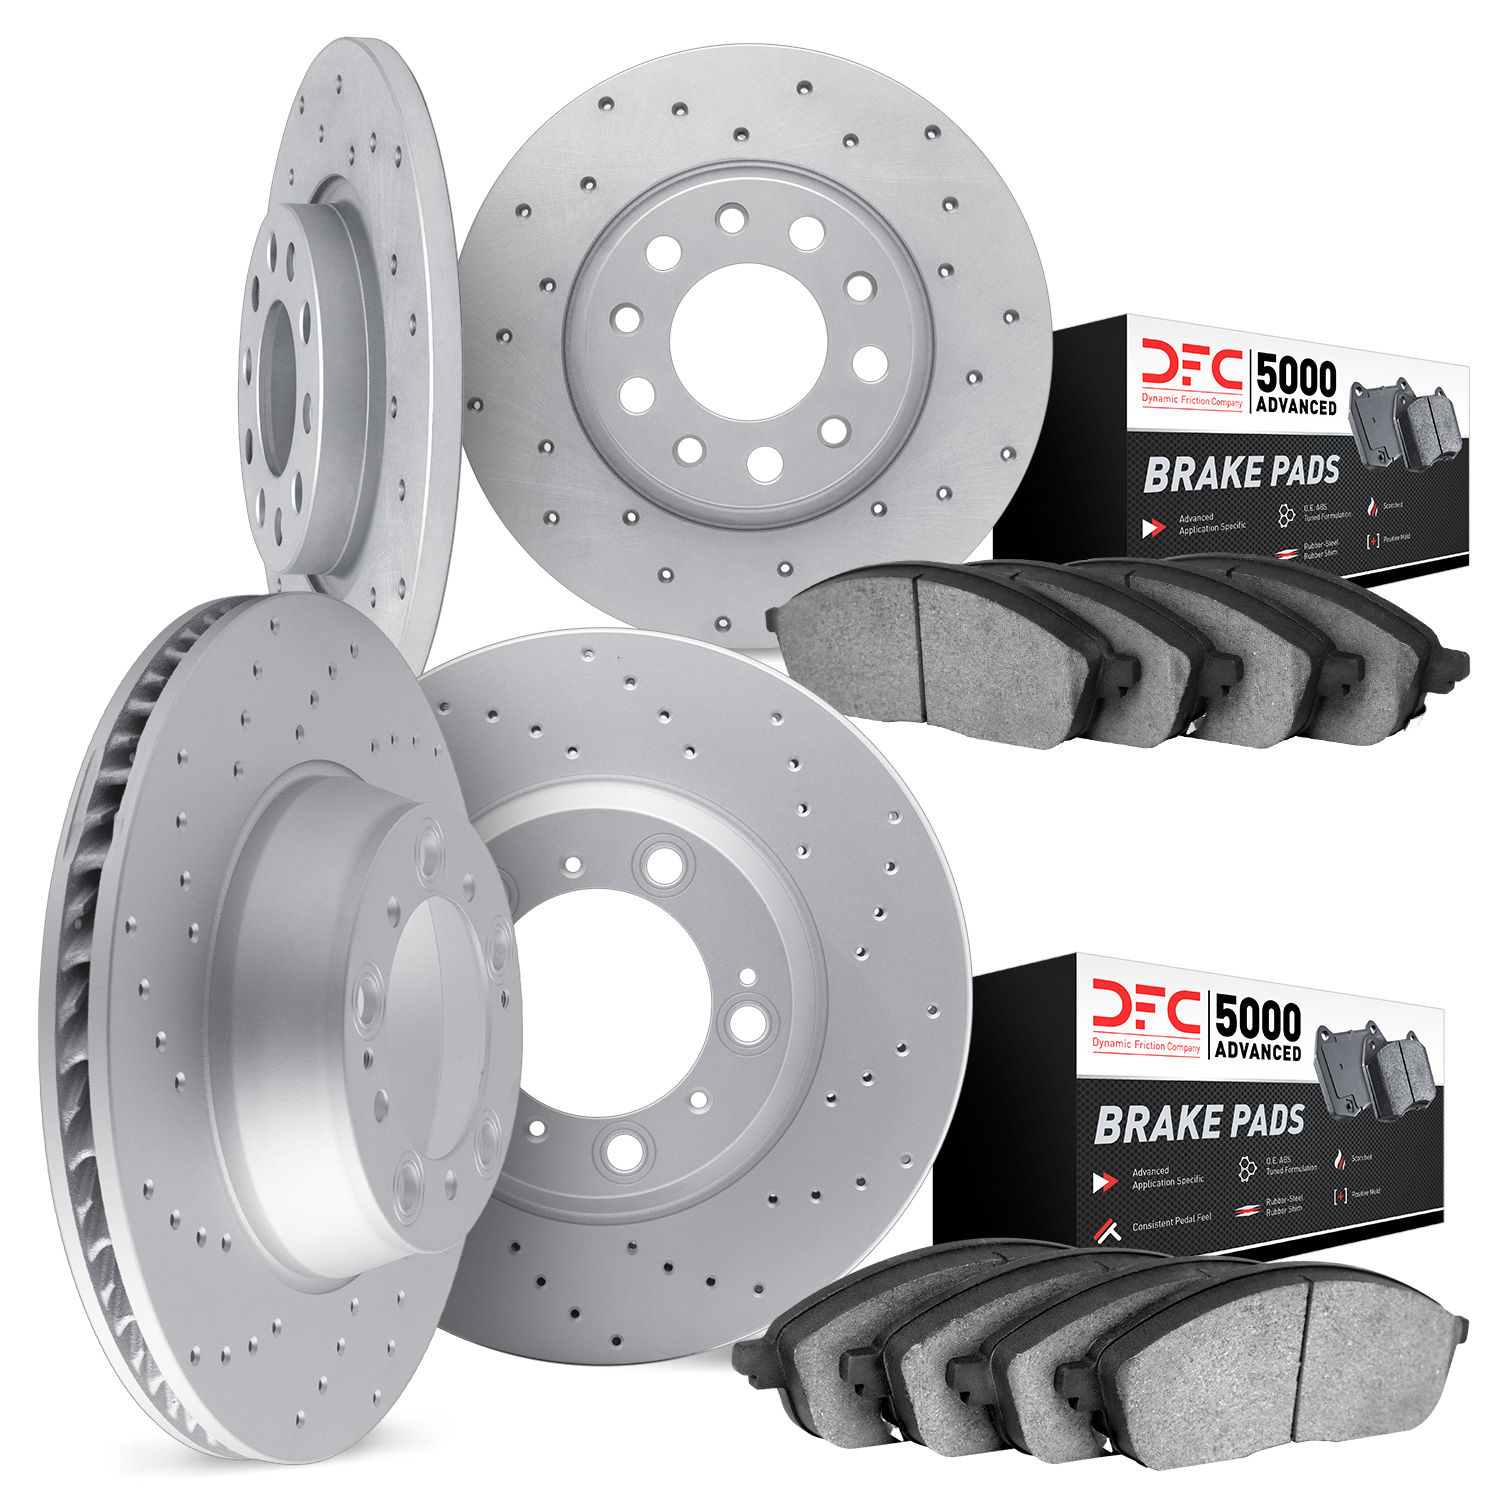 2704-67009 Geoperformance Drilled Brake Rotors with Active Performance Pads Kit, 2002-2004 Infiniti/Nissan, Position: Front and